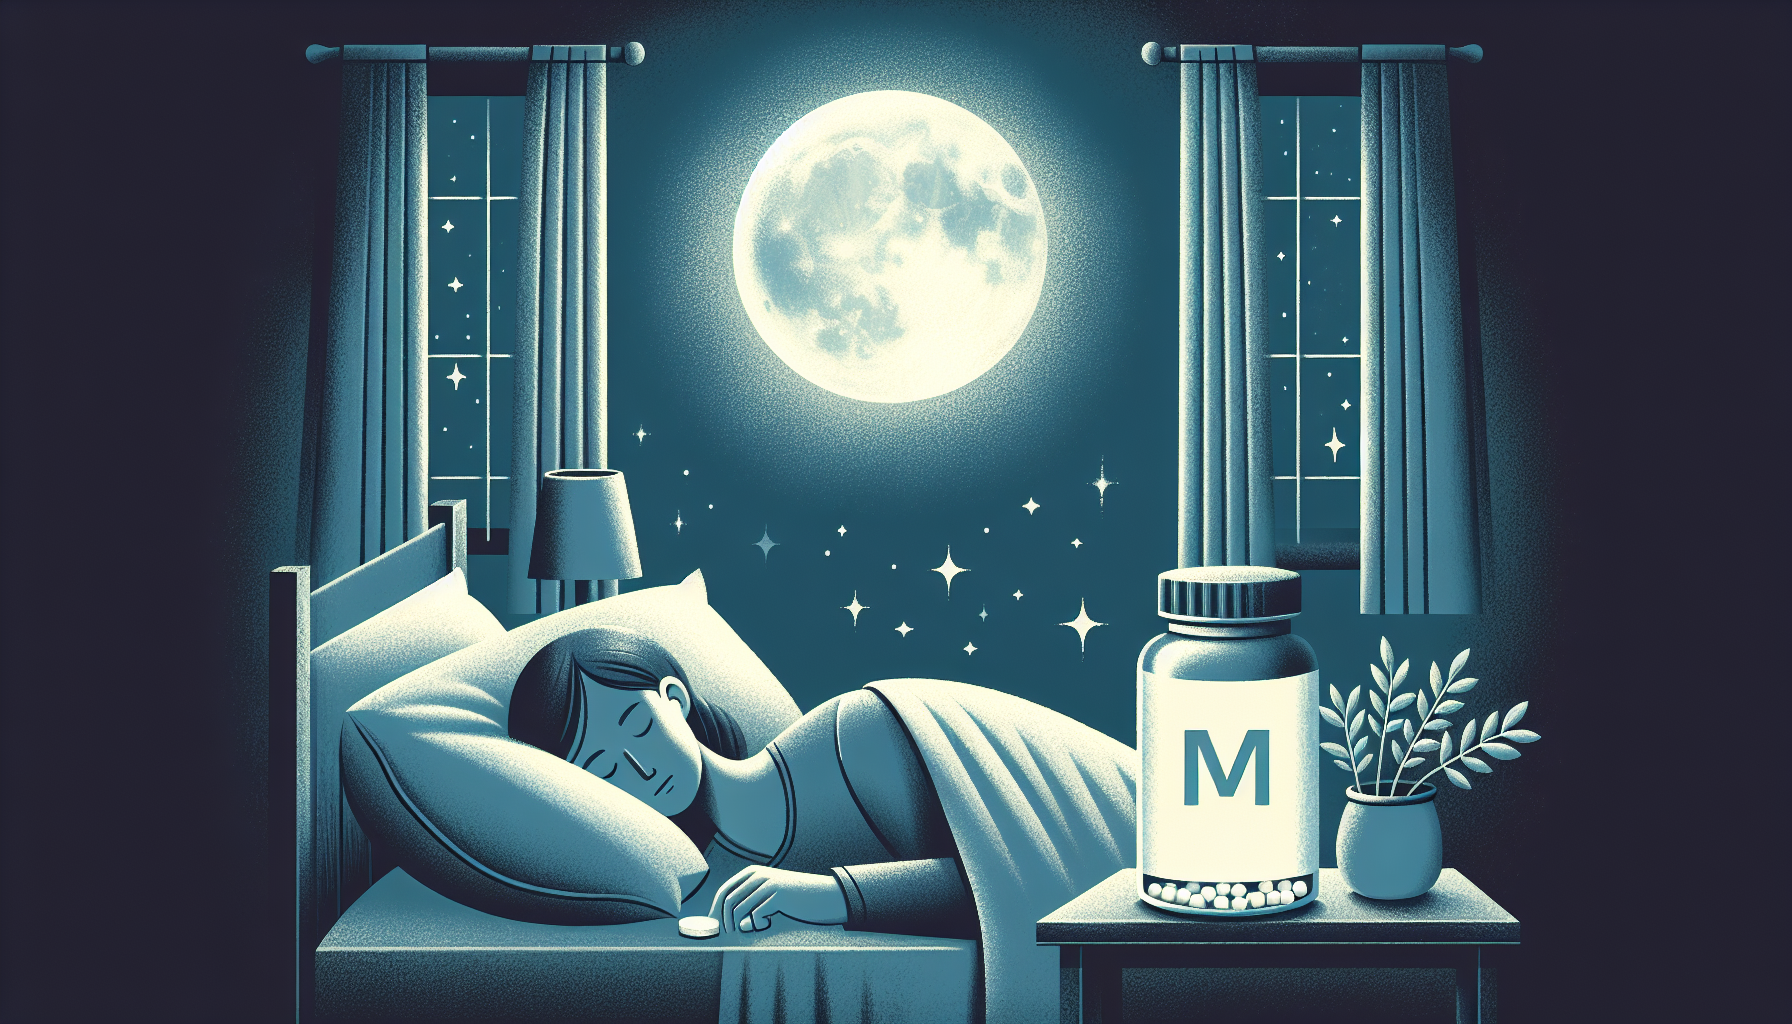 Illustration of a person sleeping peacefully